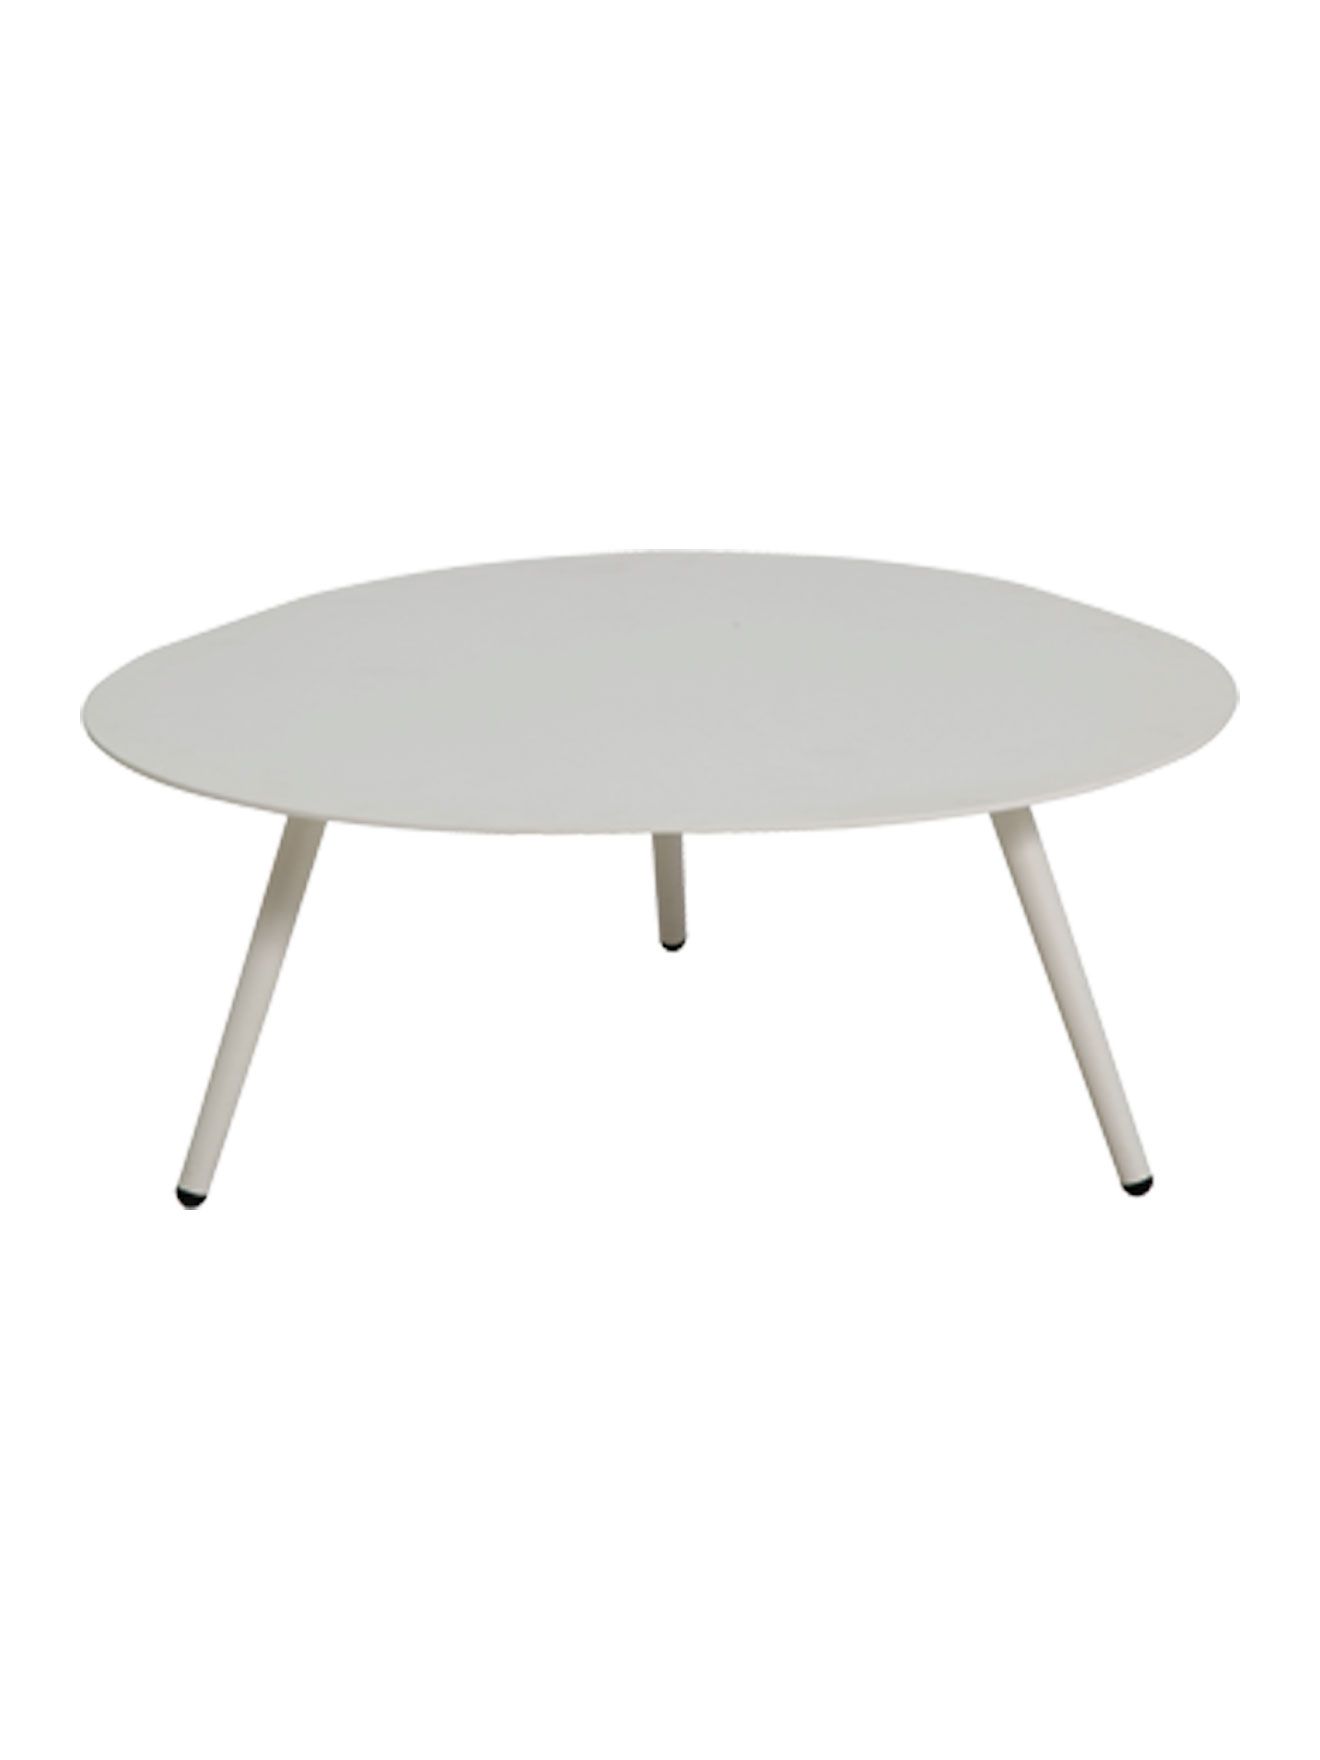 Most Current Monaco Coffee Table – Florida Seating Pertaining To Monaco Round Coffee Tables (View 13 of 15)